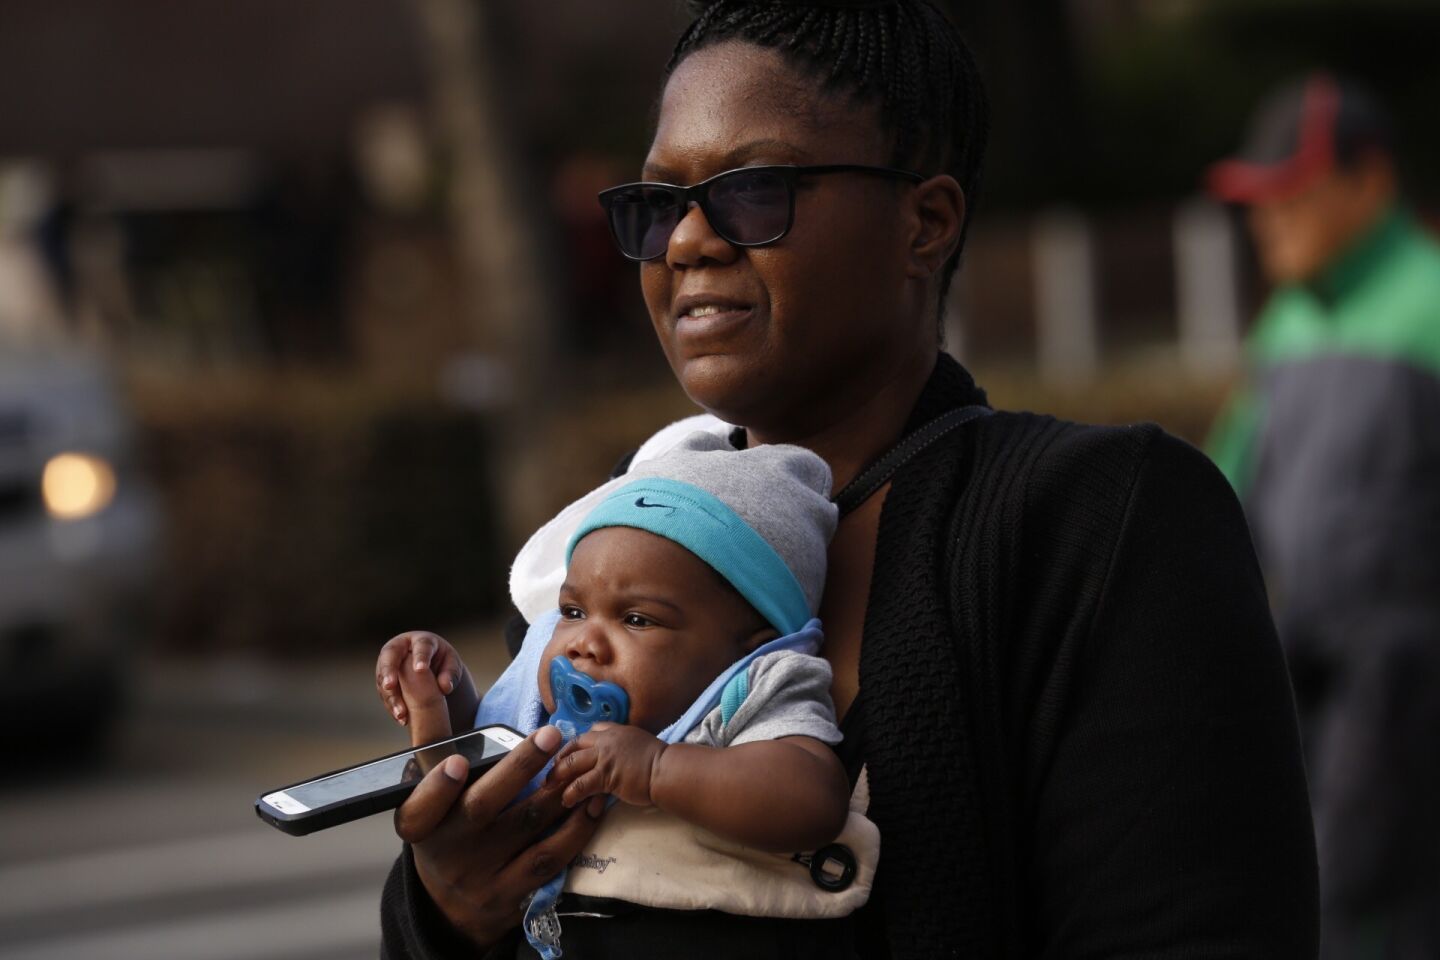 Four-month-old Kwasi Youngblood is carried by his mother, Darchelle Youngblood, in downtown Los Angeles on Jan. 4. Youngblood said she is ready for the cold and wet weather predicted for Southern California.